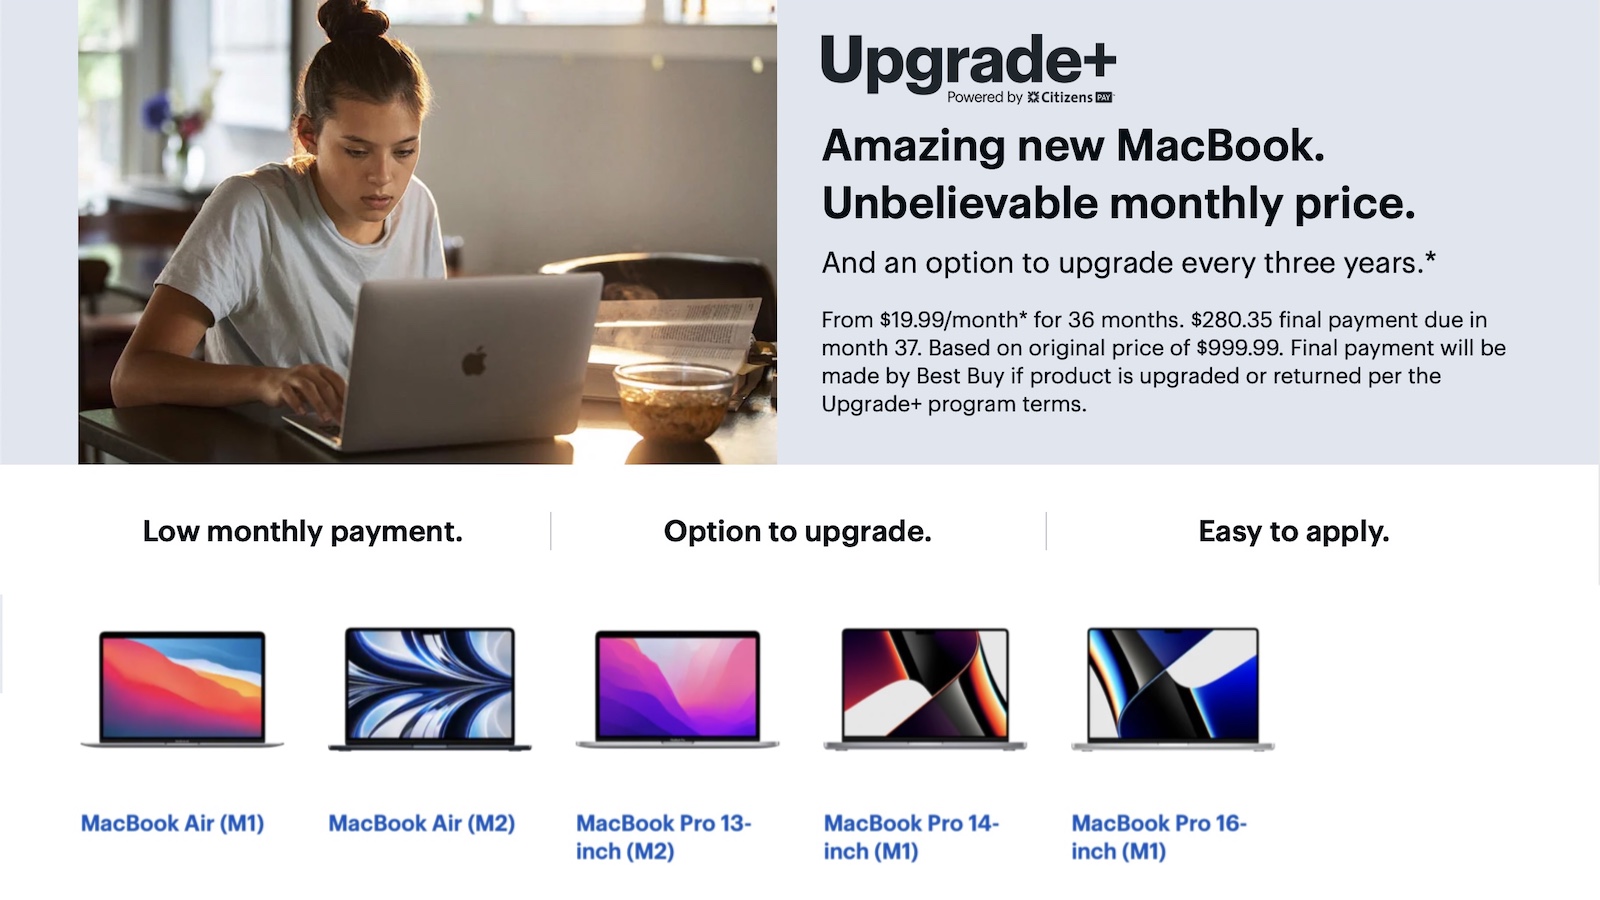 Best Buy’s ‘Upgrade+’ Program Lets Customers Get a New Mac Laptop Every Three Years With Monthly Financing